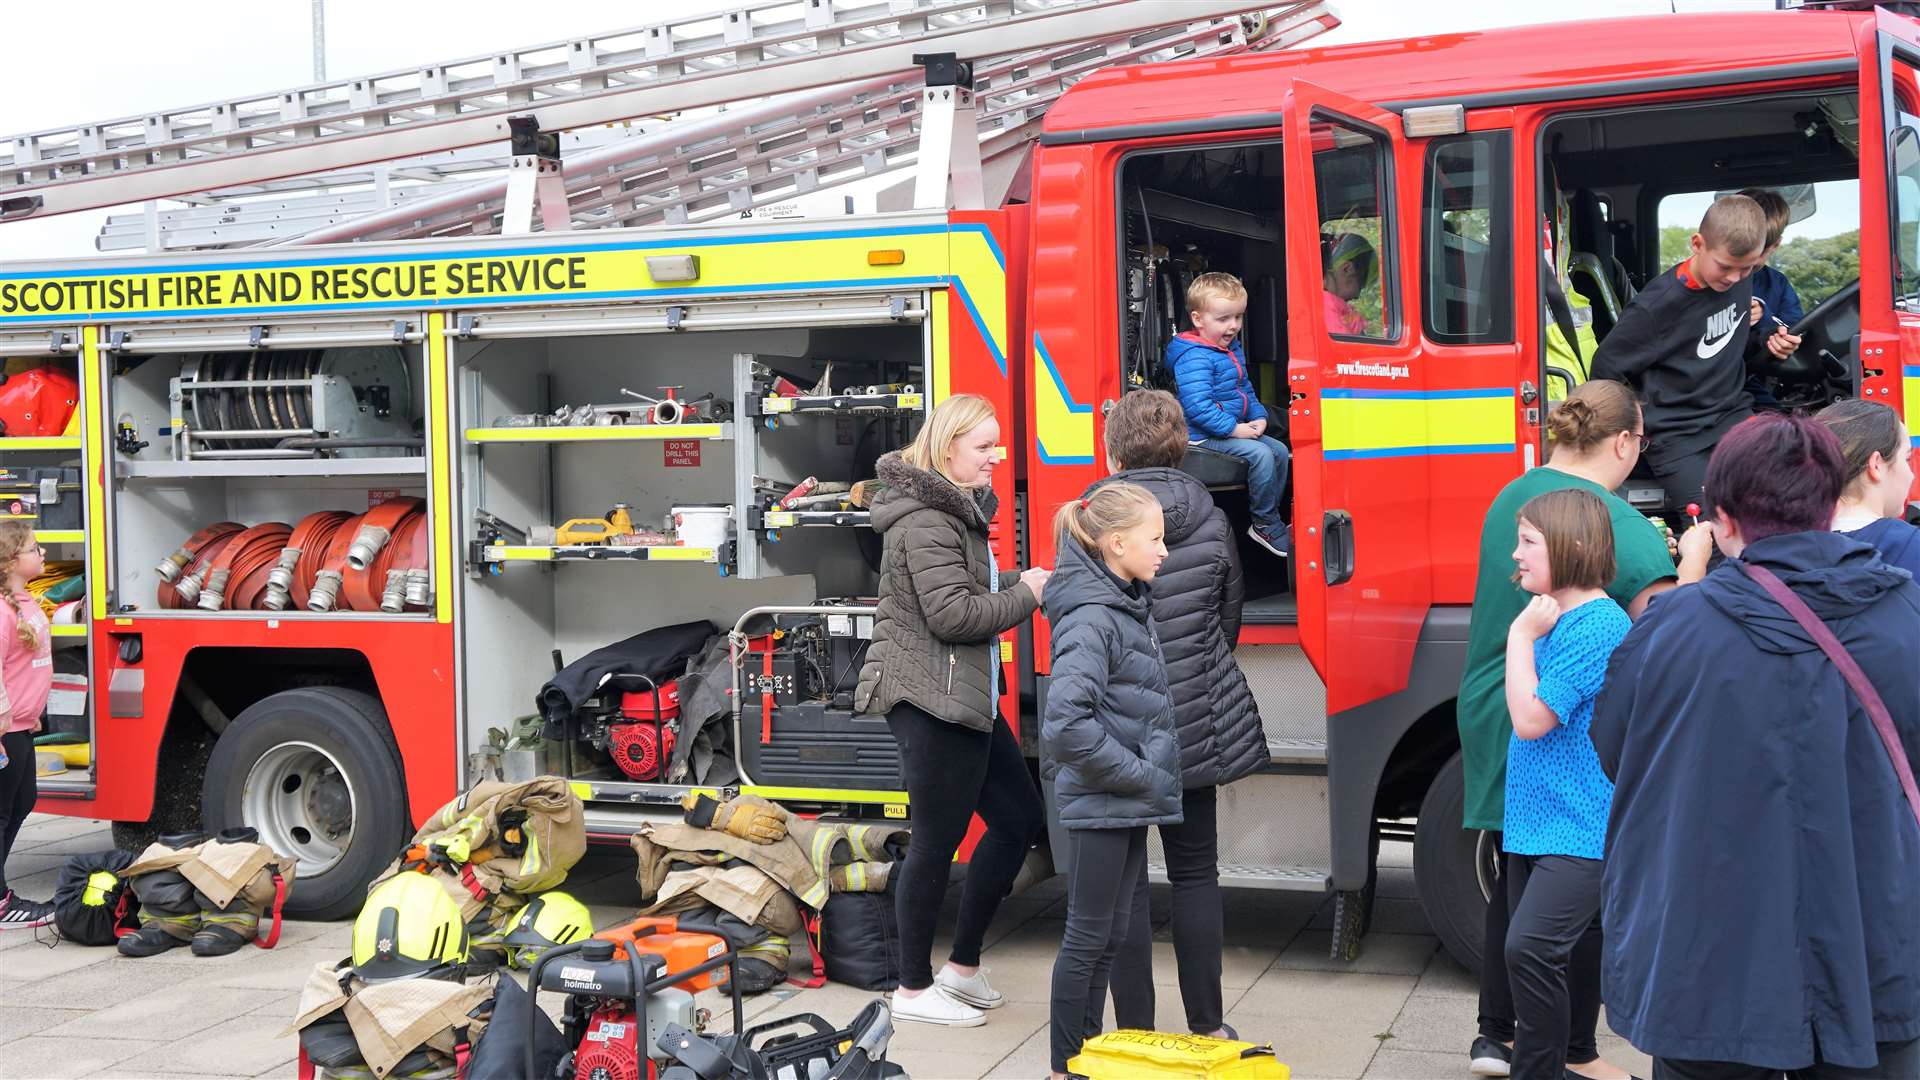 Many children enjoyed clambering on board the fire engine at the front of the school. Picture: DGS